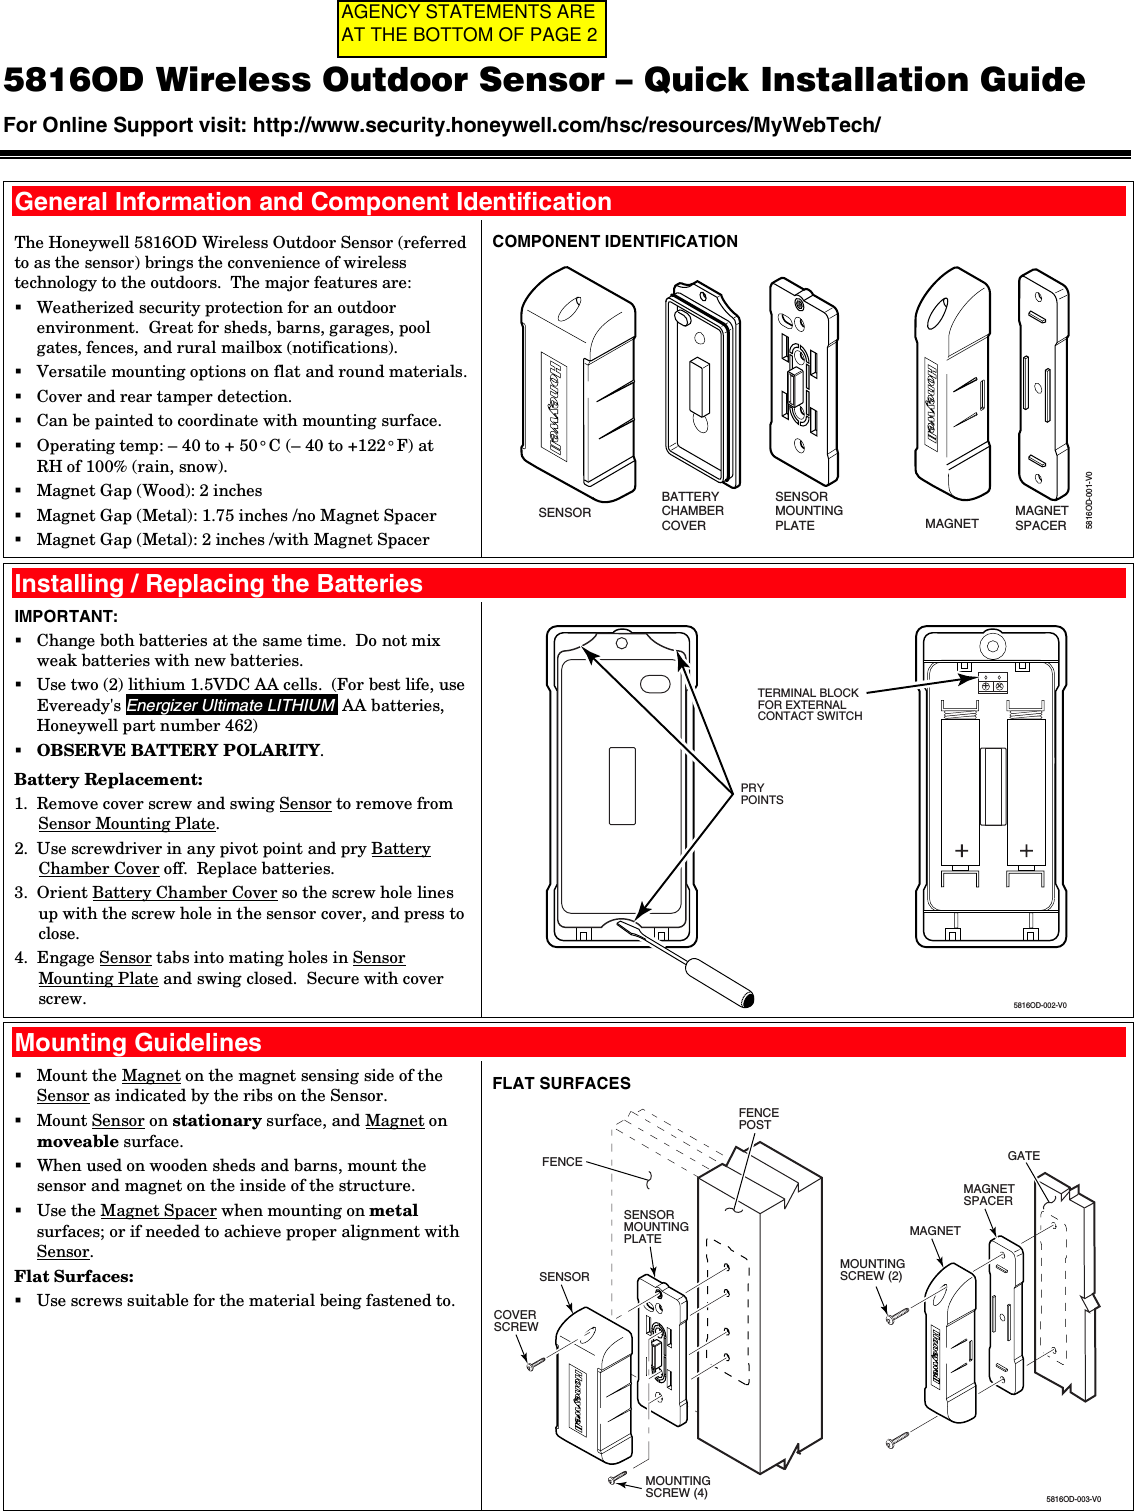  5816OD Wireless Outdoor Sensor – Quick Installation Guide For Online Support visit: http://www.security.honeywell.com/hsc/resources/MyWebTech/    General Information and Component Identification The Honeywell 5816OD Wireless Outdoor Sensor (referred to as the sensor) brings the convenience of wireless technology to the outdoors.  The major features are:  Weatherized security protection for an outdoor environment.  Great for sheds, barns, garages, pool gates, fences, and rural mailbox (notifications).  Versatile mounting options on flat and round materials.  Cover and rear tamper detection.  Can be painted to coordinate with mounting surface.  Operating temp: – 40 to + 50° C (– 40 to +122° F) at  RH of 100% (rain, snow).  Magnet Gap (Wood): 2 inches  Magnet Gap (Metal): 1.75 inches /no Magnet Spacer  Magnet Gap (Metal): 2 inches /with Magnet Spacer COMPONENT IDENTIFICATION 5816OD-001-V0SENSORMOUNTINGPLATE MAGNETMAGNETSPACERSENSORBATTERYCHAMBERCOVER   Installing / Replacing the Batteries IMPORTANT:  Change both batteries at the same time.  Do not mix weak batteries with new batteries.  Use two (2) lithium 1.5VDC AA cells.  (For best life, use Eveready&apos;s Energizer Ultimate LITHIUM  AA batteries, Honeywell part number 462)  OBSERVE BATTERY POLARITY. Battery Replacement: 1.  Remove cover screw and swing Sensor to remove from Sensor Mounting Plate. 2.  Use screwdriver in any pivot point and pry Battery Chamber Cover off.  Replace batteries. 3.  Orient Battery Chamber Cover so the screw hole lines up with the screw hole in the sensor cover, and press to close. 4.  Engage Sensor tabs into mating holes in Sensor Mounting Plate and swing closed.  Secure with cover screw.  5816OD-002-V0++PRYPOINTSTERMINAL BLOCKFOR EXTERNALCONTACT SWITCH  Mounting Guidelines  Mount the Magnet on the magnet sensing side of the Sensor as indicated by the ribs on the Sensor.  Mount Sensor on stationary surface, and Magnet on moveable surface.   When used on wooden sheds and barns, mount the sensor and magnet on the inside of the structure.  Use the Magnet Spacer when mounting on metal surfaces; or if needed to achieve proper alignment with Sensor. Flat Surfaces:  Use screws suitable for the material being fastened to.  FLAT SURFACES COVERSCREW MOUNTINGSCREW (4) 5816OD-003-V0MAGNET MAGNETSPACERMOUNTINGSCREW (2) SENSOR SENSORMOUNTINGPLATEFENCEPOSTFENCE GATE AGENCY STATEMENTS ARE AT THE BOTTOM OF PAGE 2